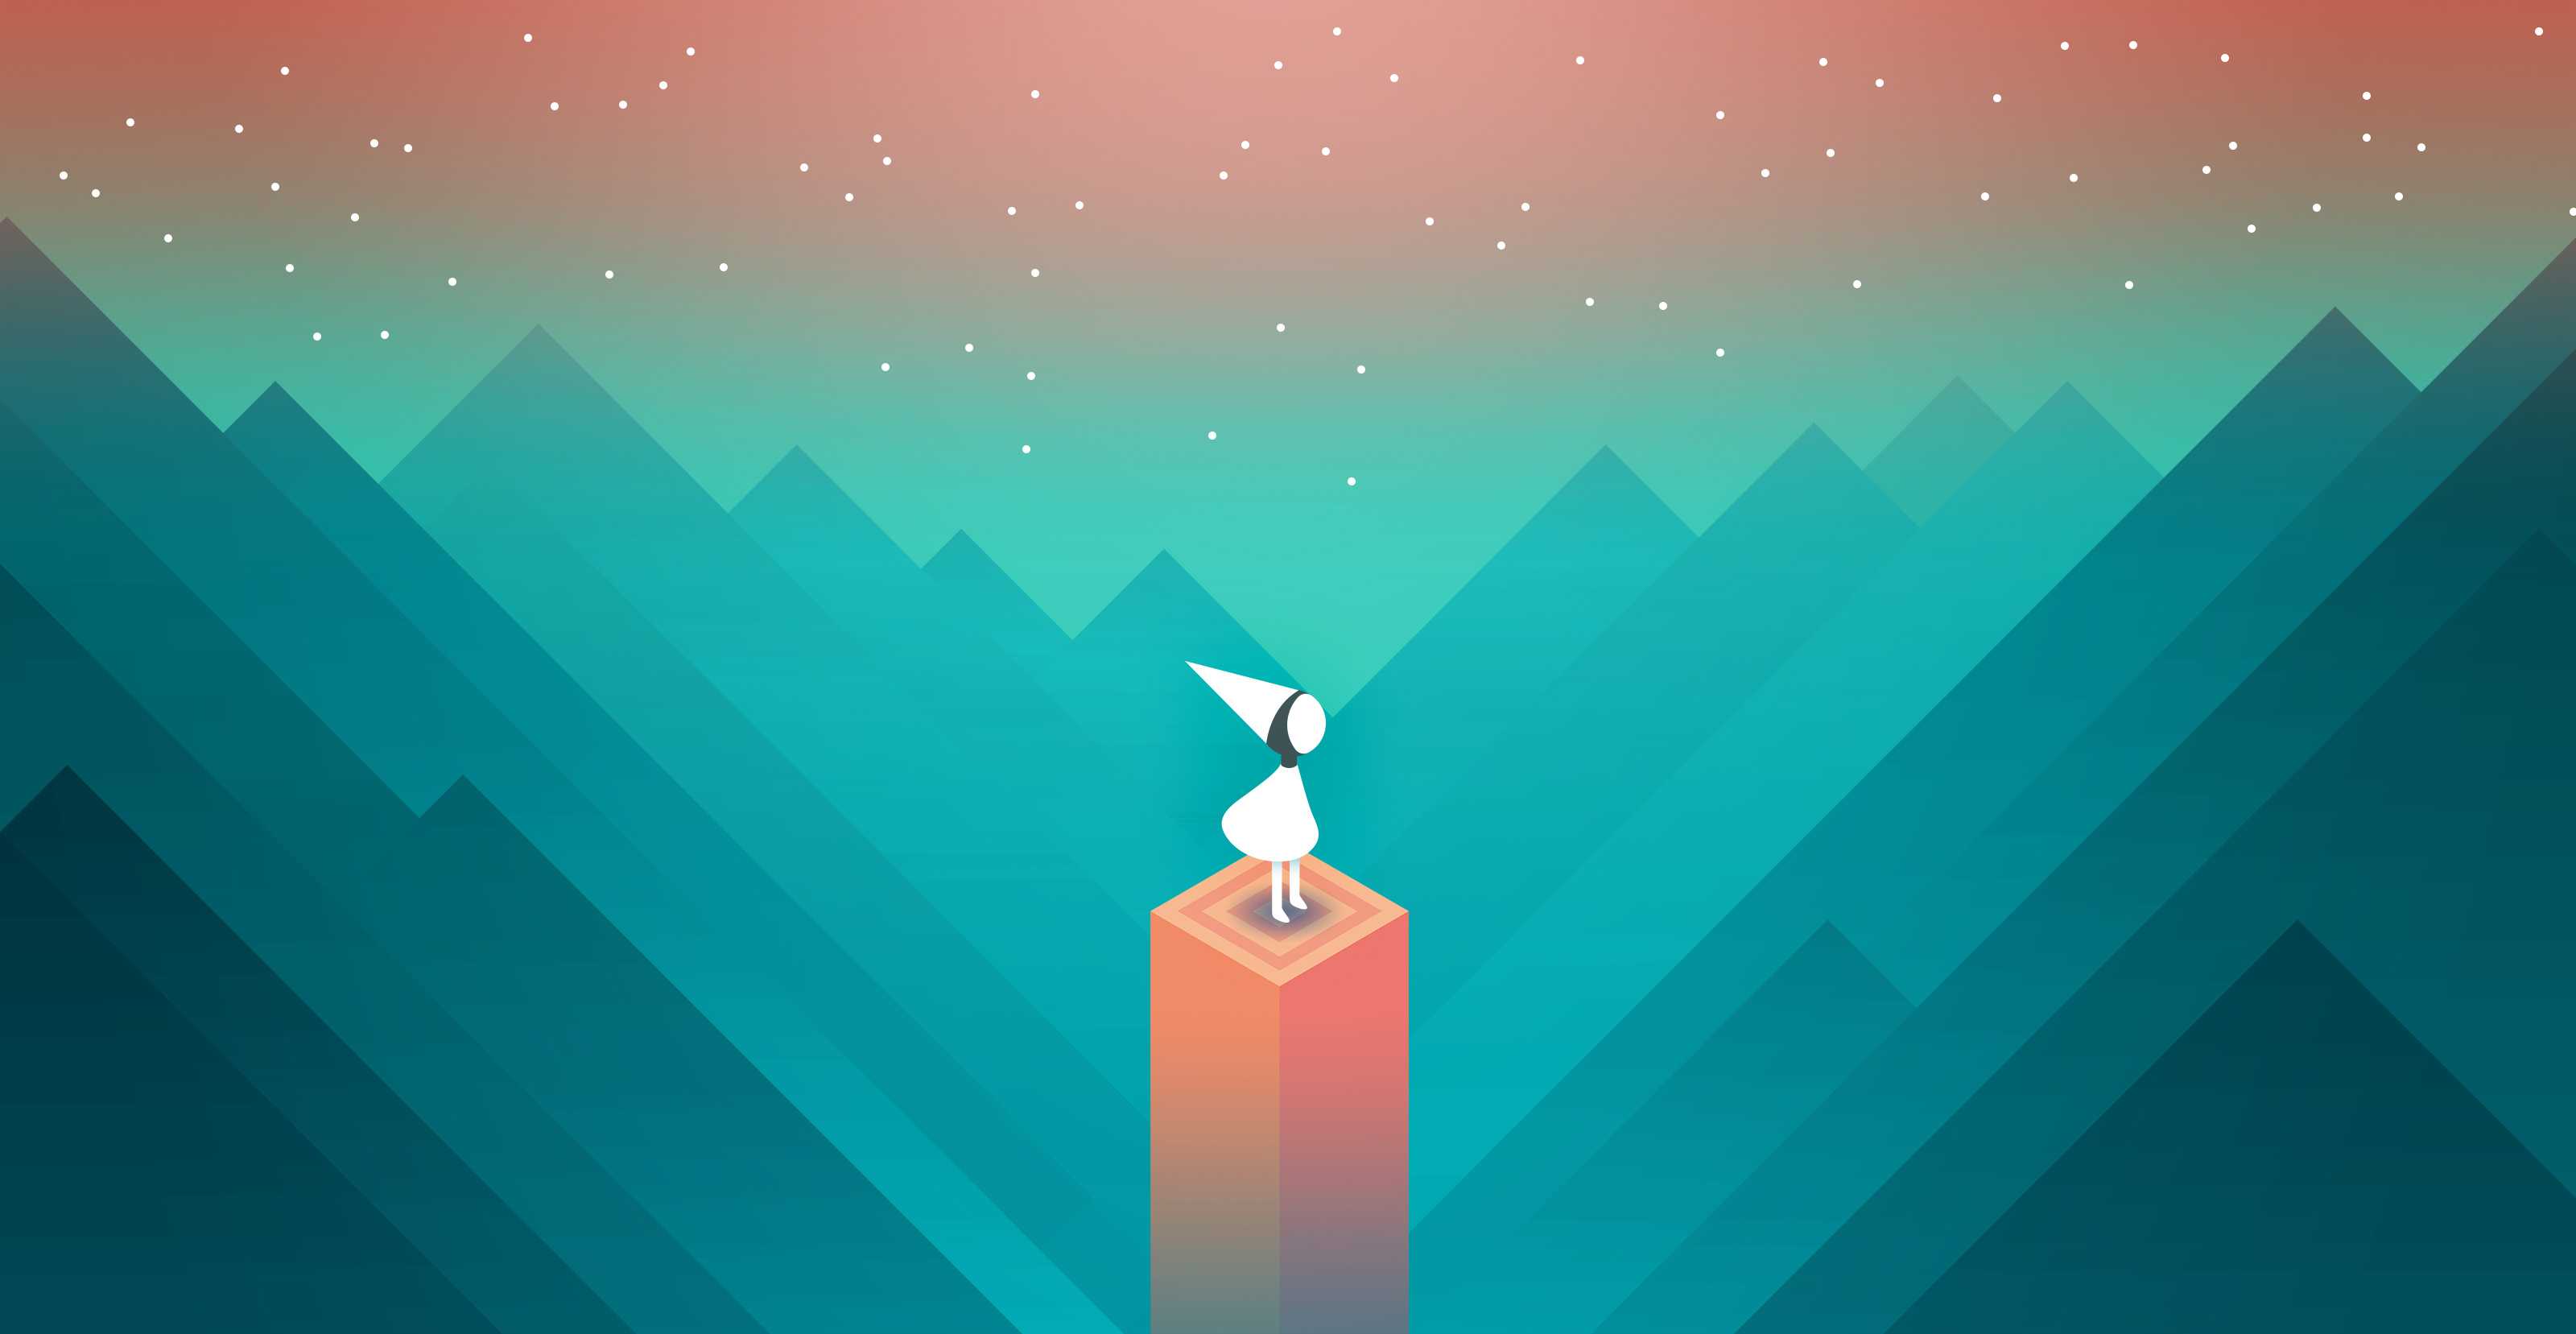 Screenshot of Monument Valley 1 game